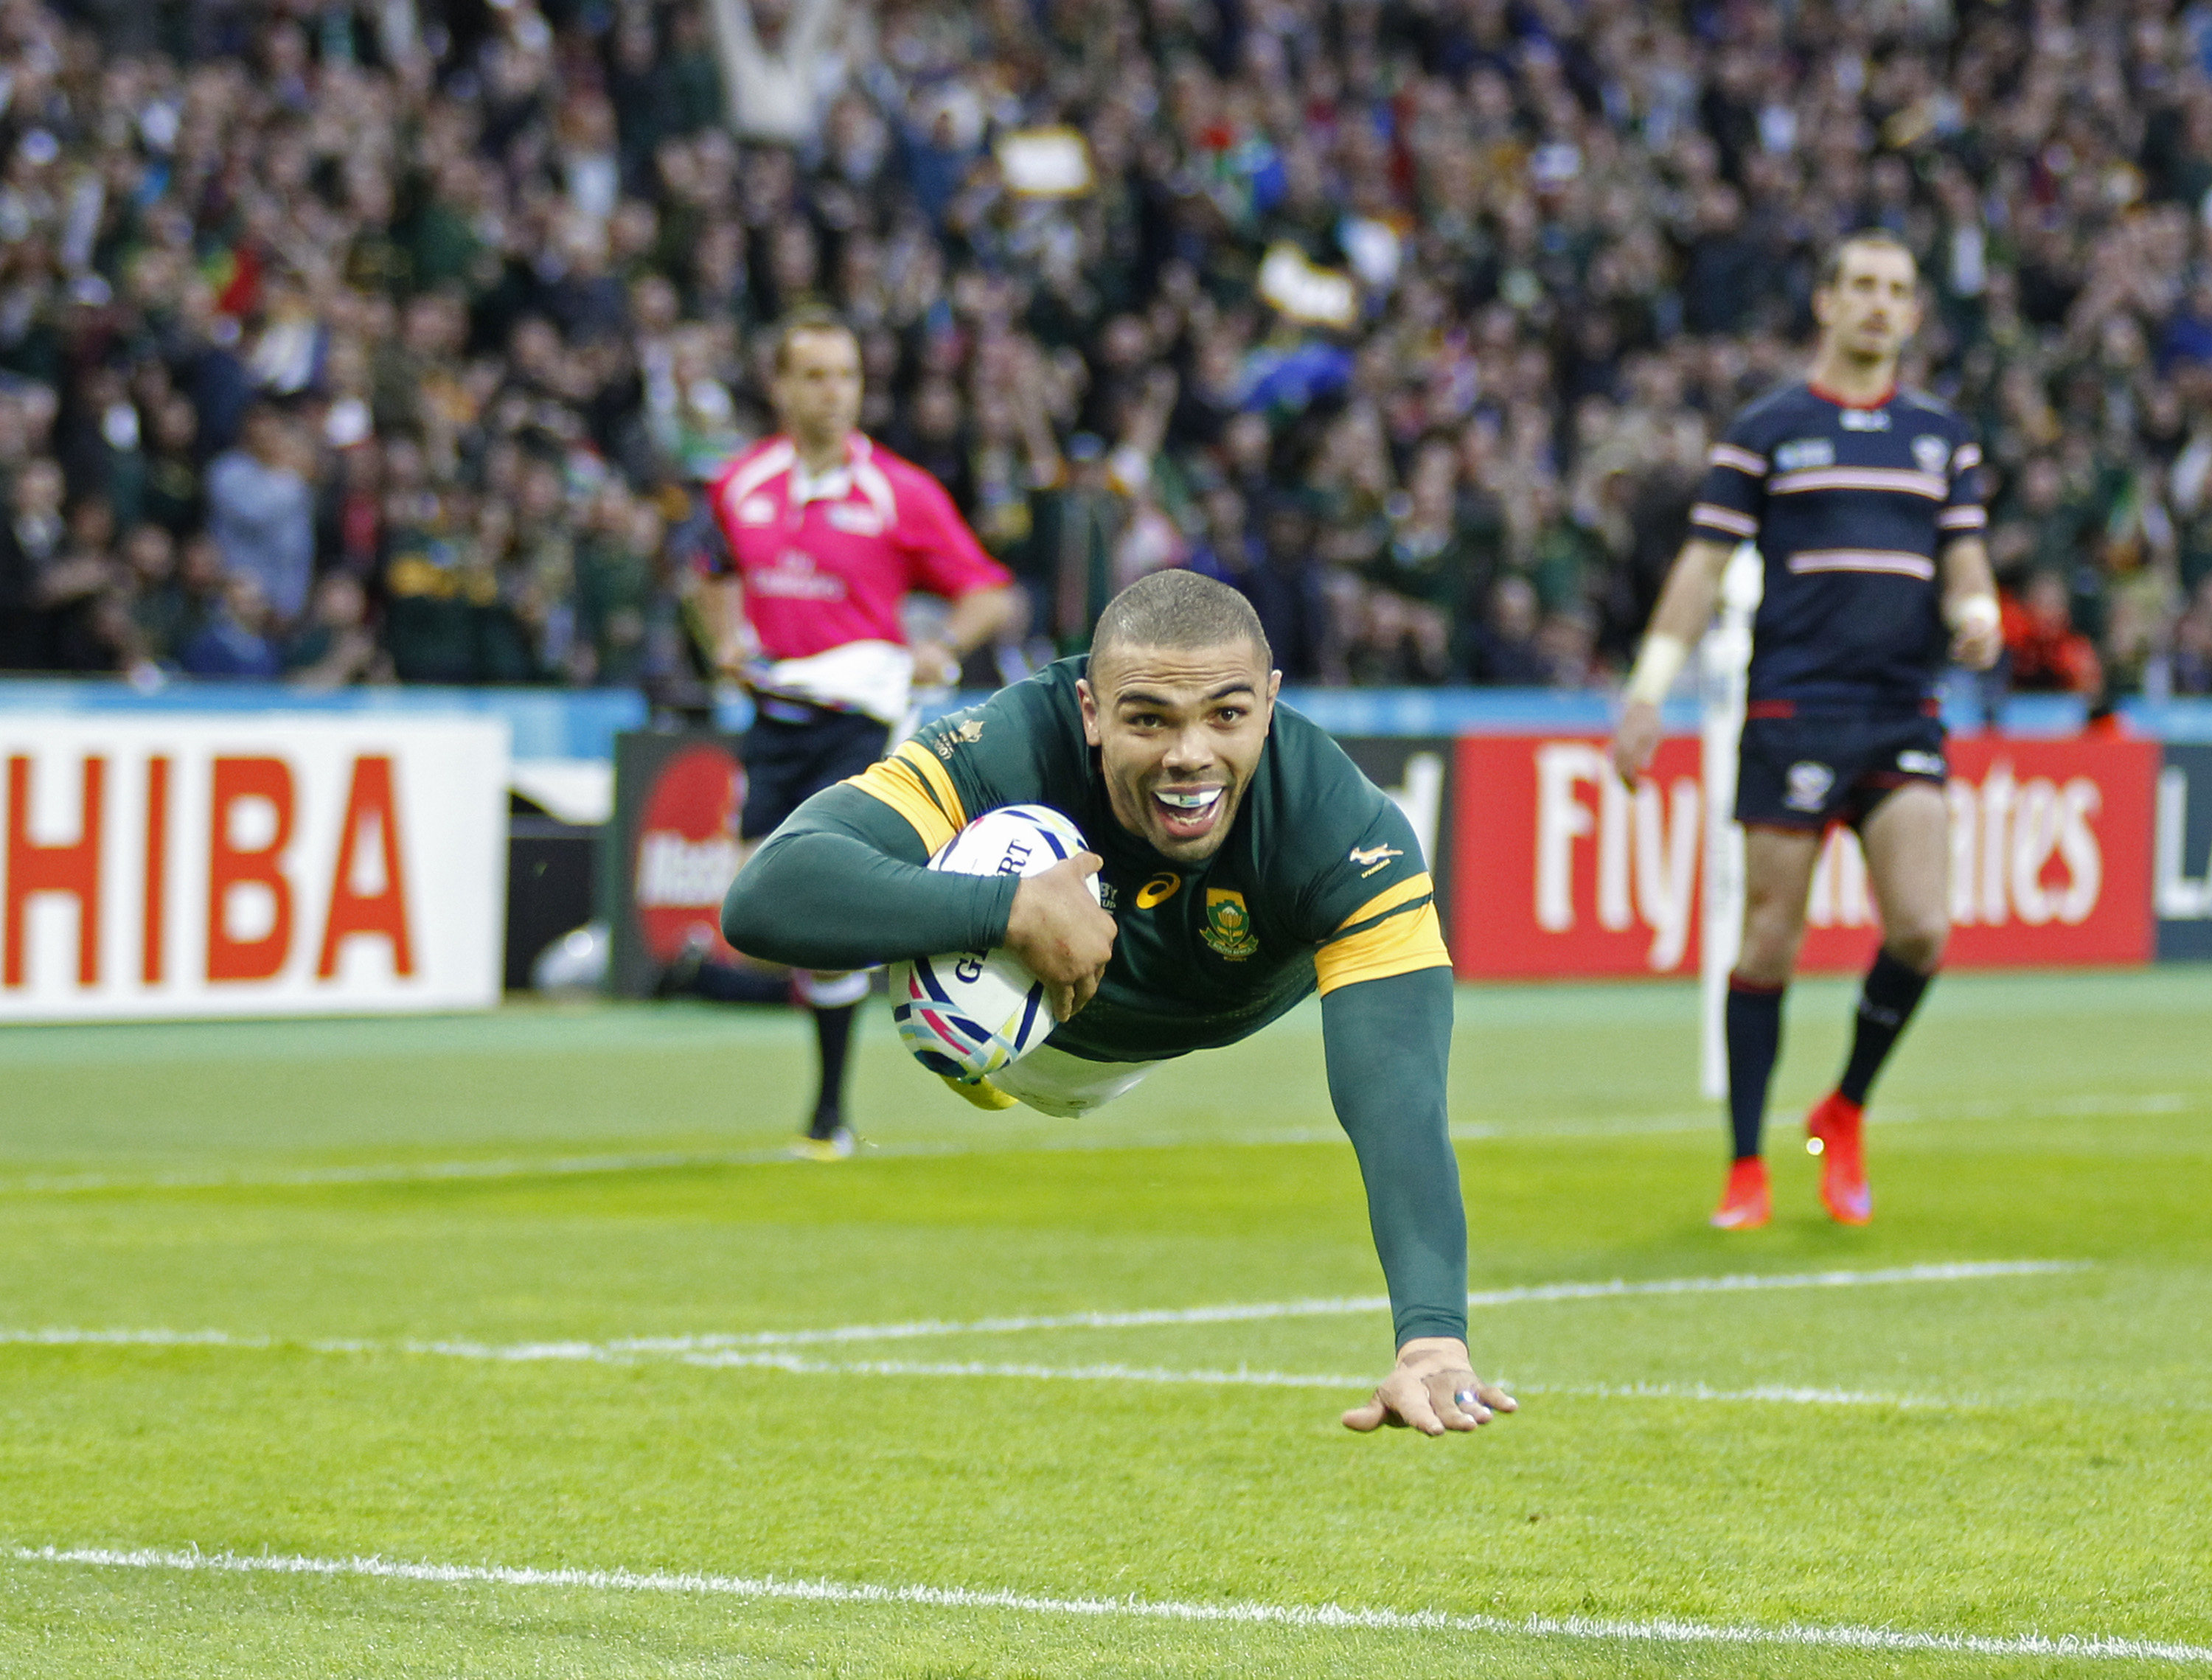 Bryan Habana shows his power during his playing days, as he scores a try at the 2015 Rugby World Cup. Photo: Getty Images